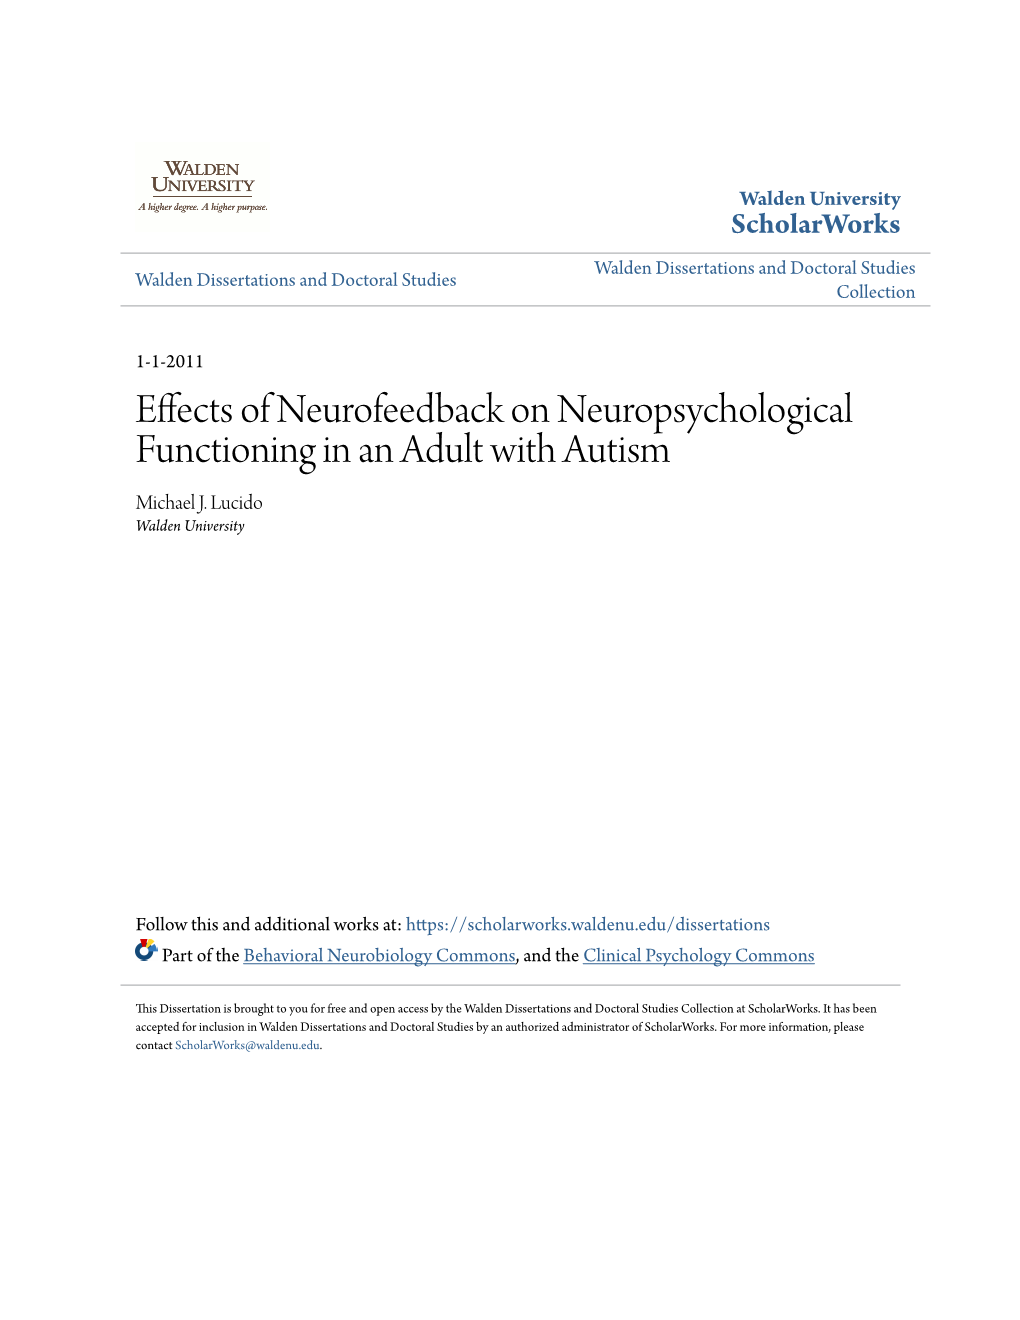 Effects of Neurofeedback on Neuropsychological Functioning in an Adult with Autism Michael J